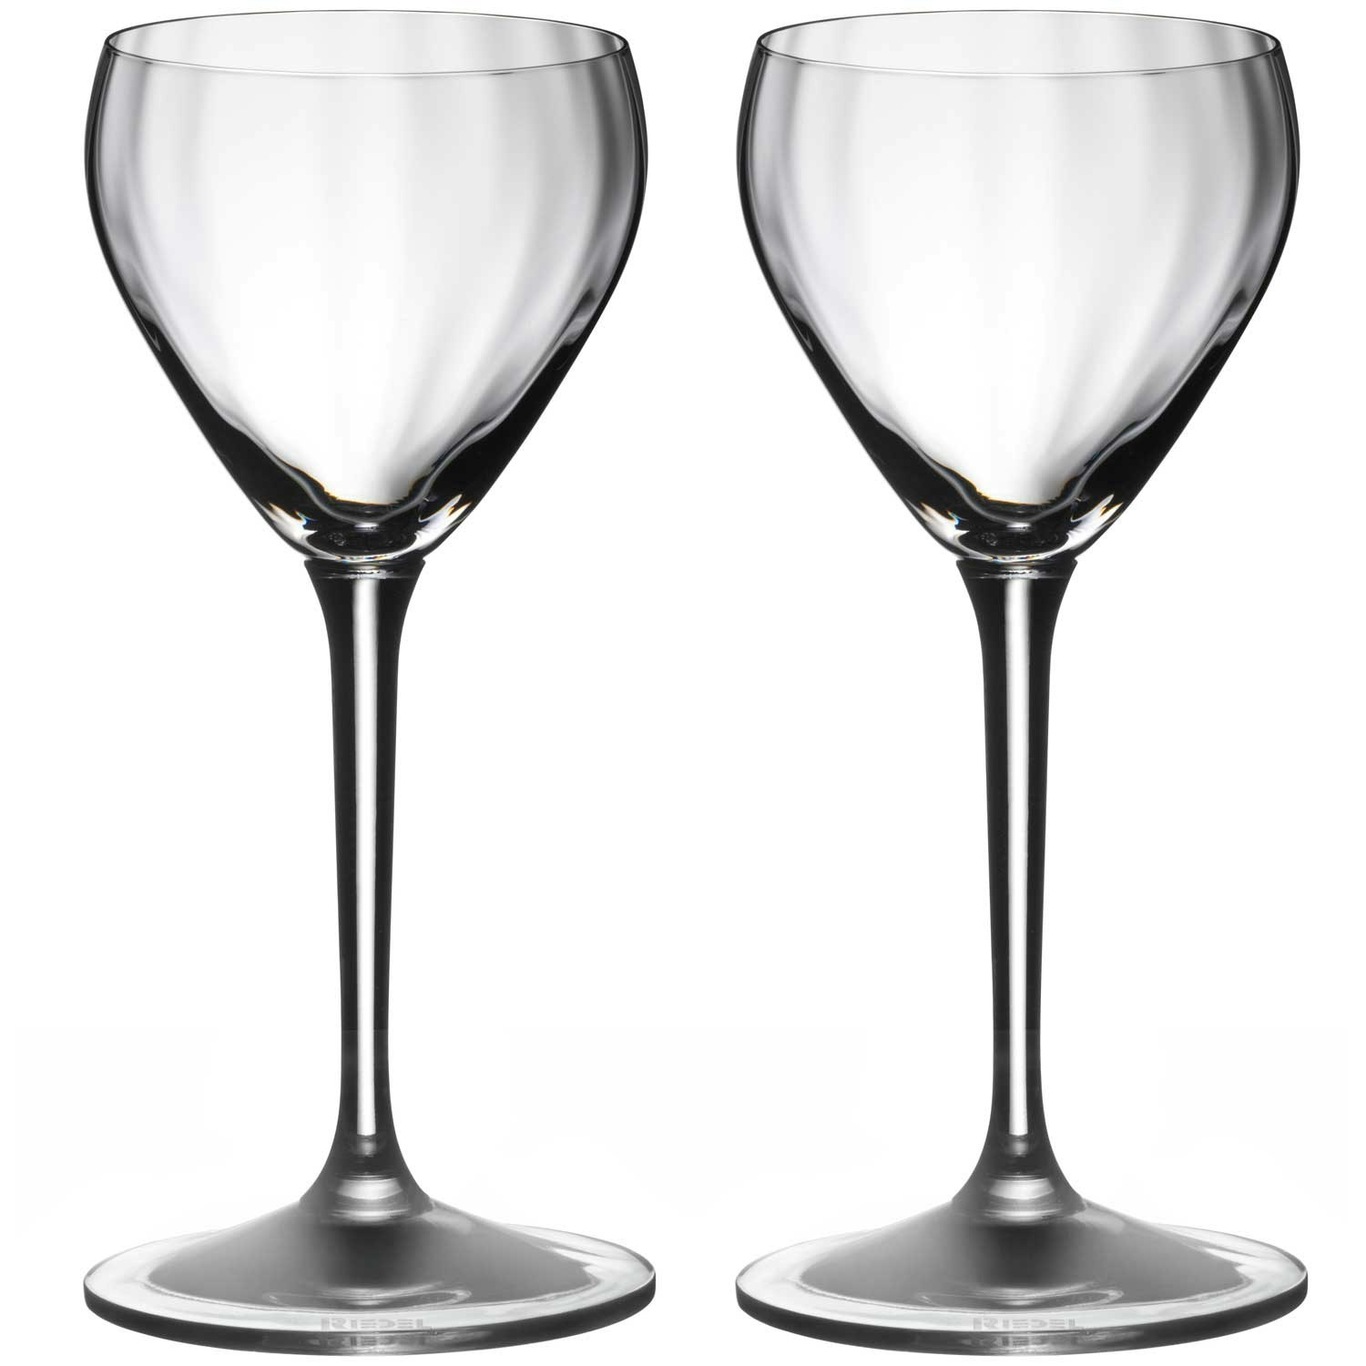 https://royaldesign.com/image/11/riedel-drink-specific-nick-nora-0?w=800&quality=80